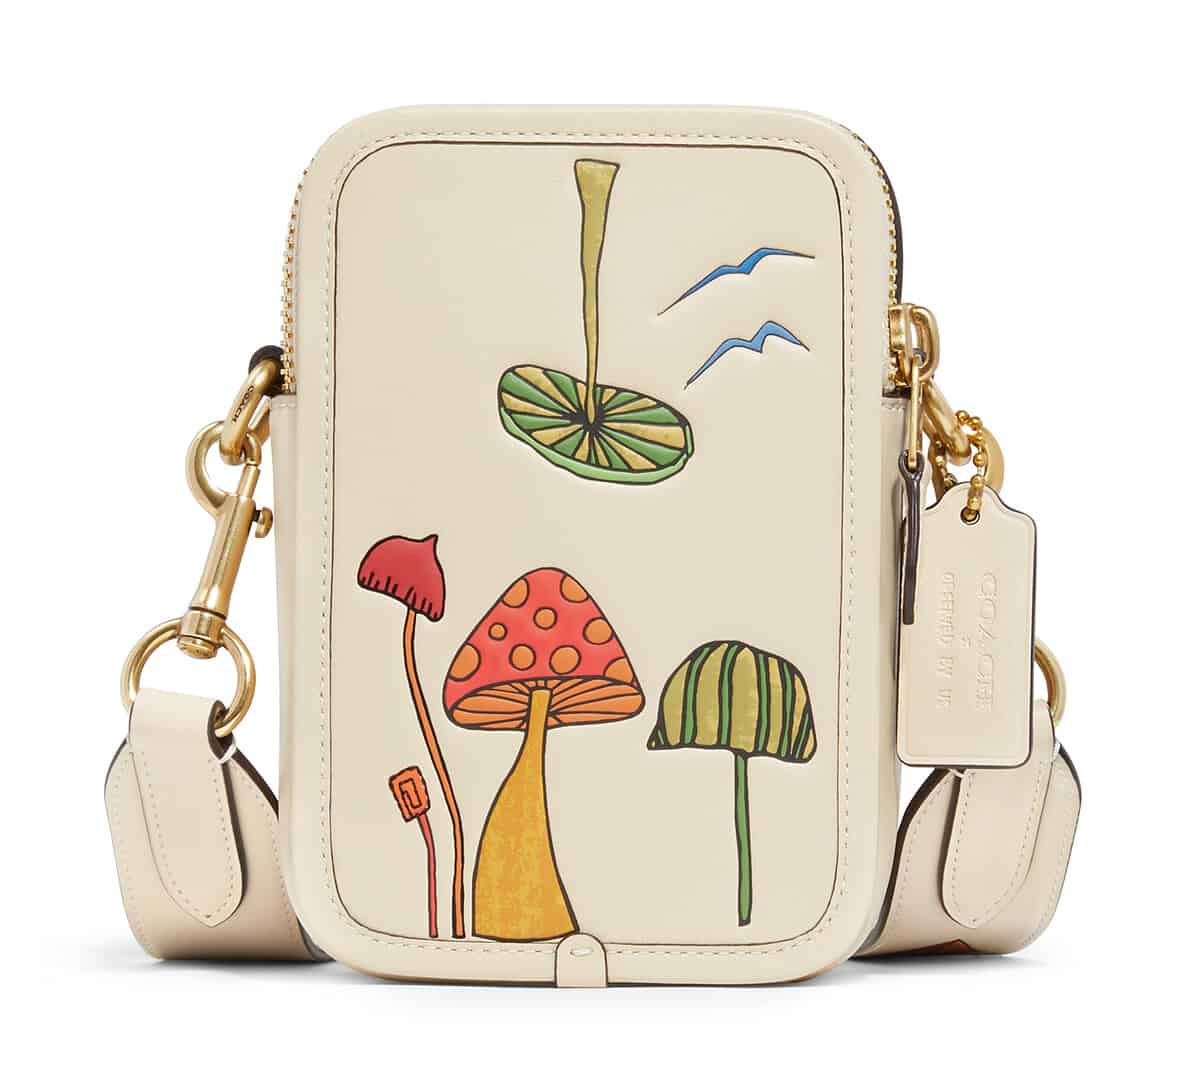 Coach x Observed By Us Launch: Kirsten Dunst Collaborates on